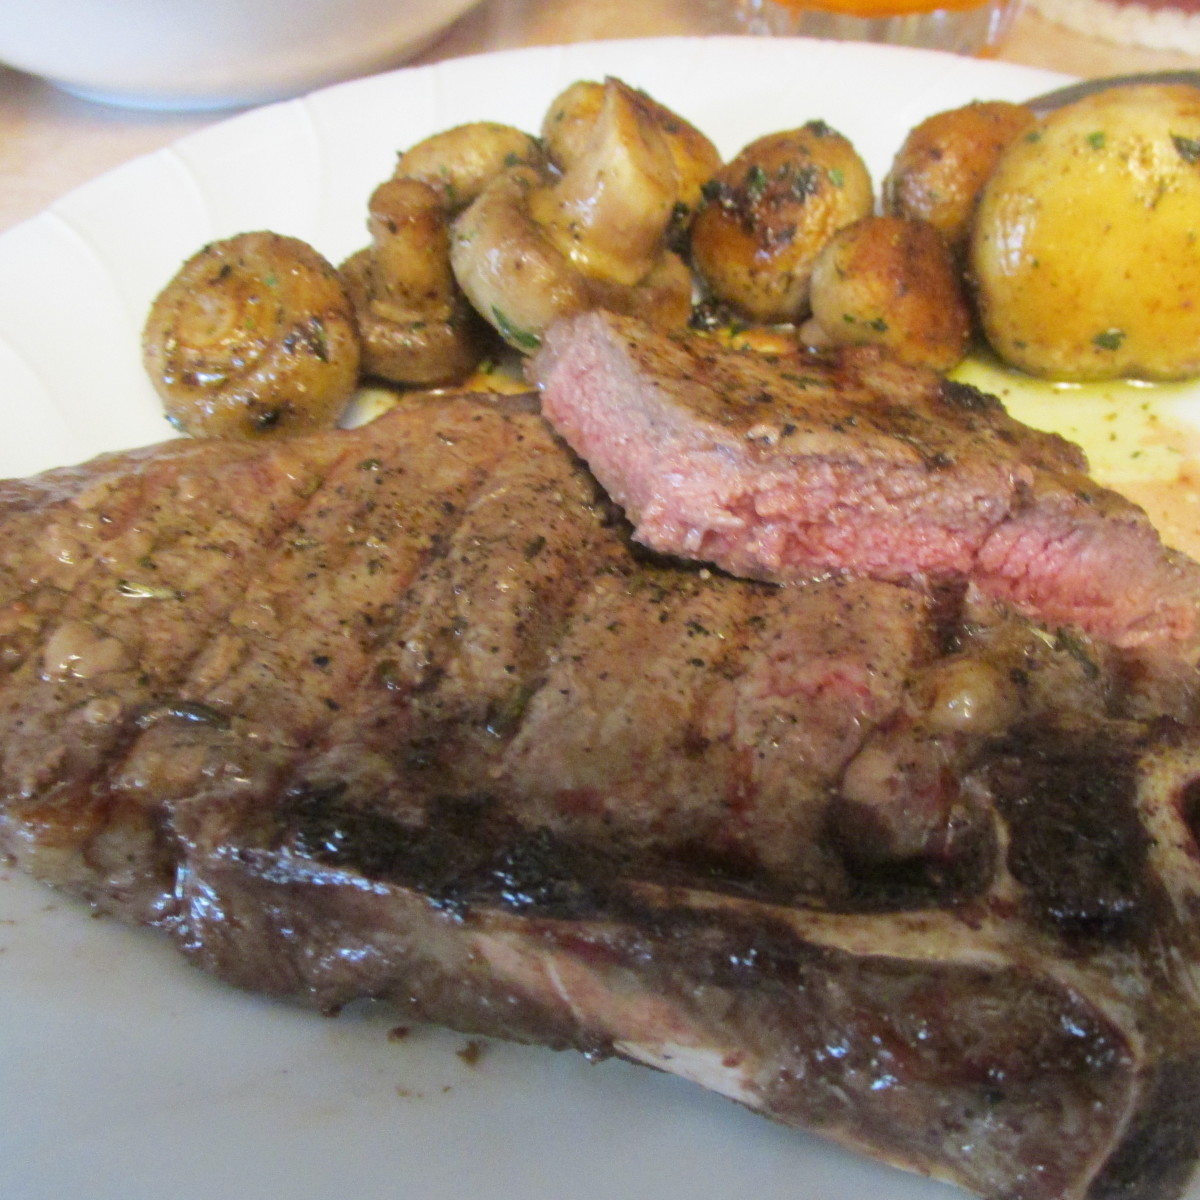 My steak, cooked medium-rare, with mushrooms in the background.